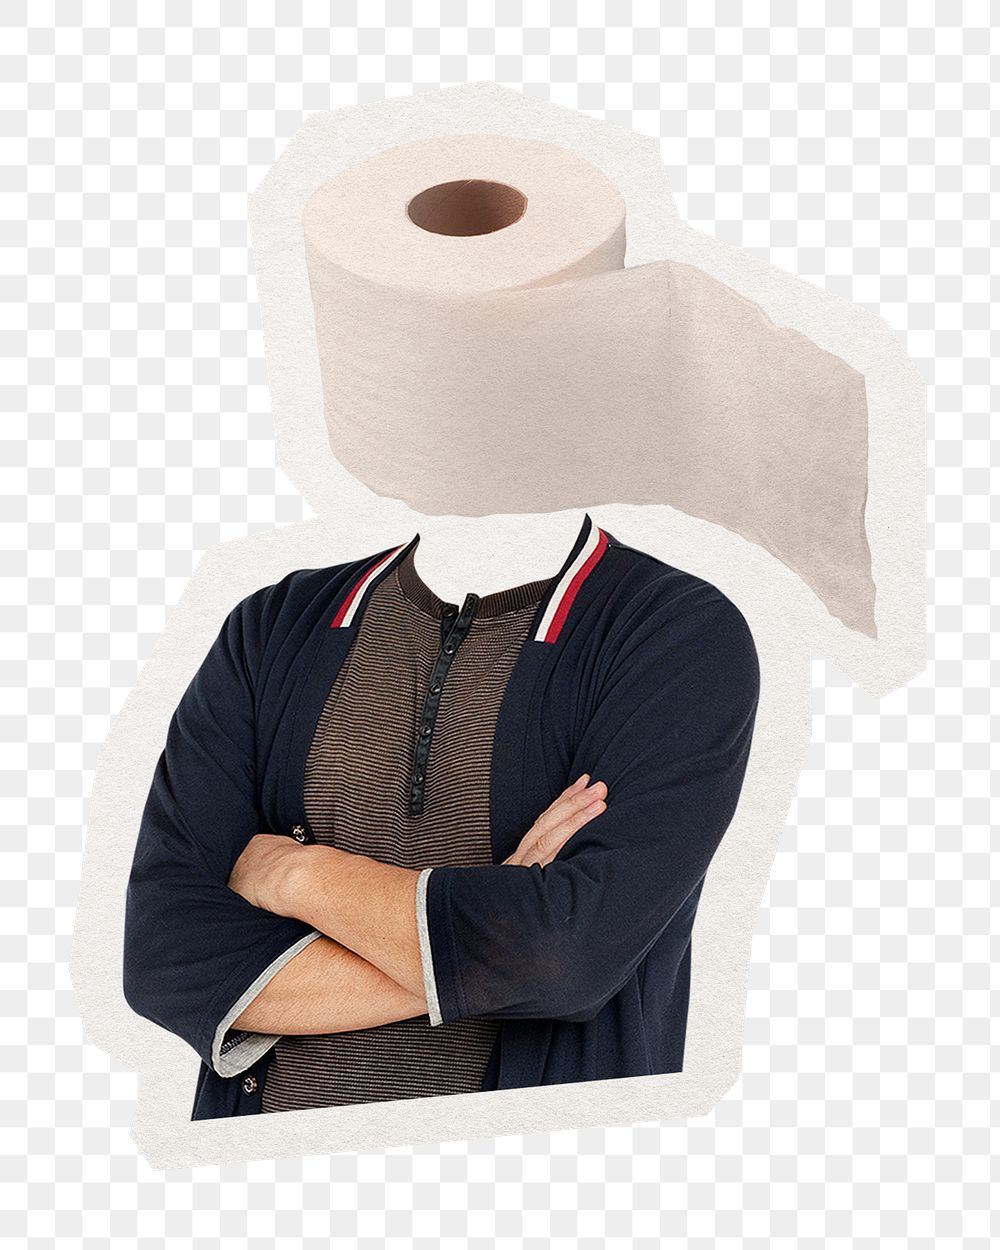 Tissue head png man, medical, health remixed media, transparent background